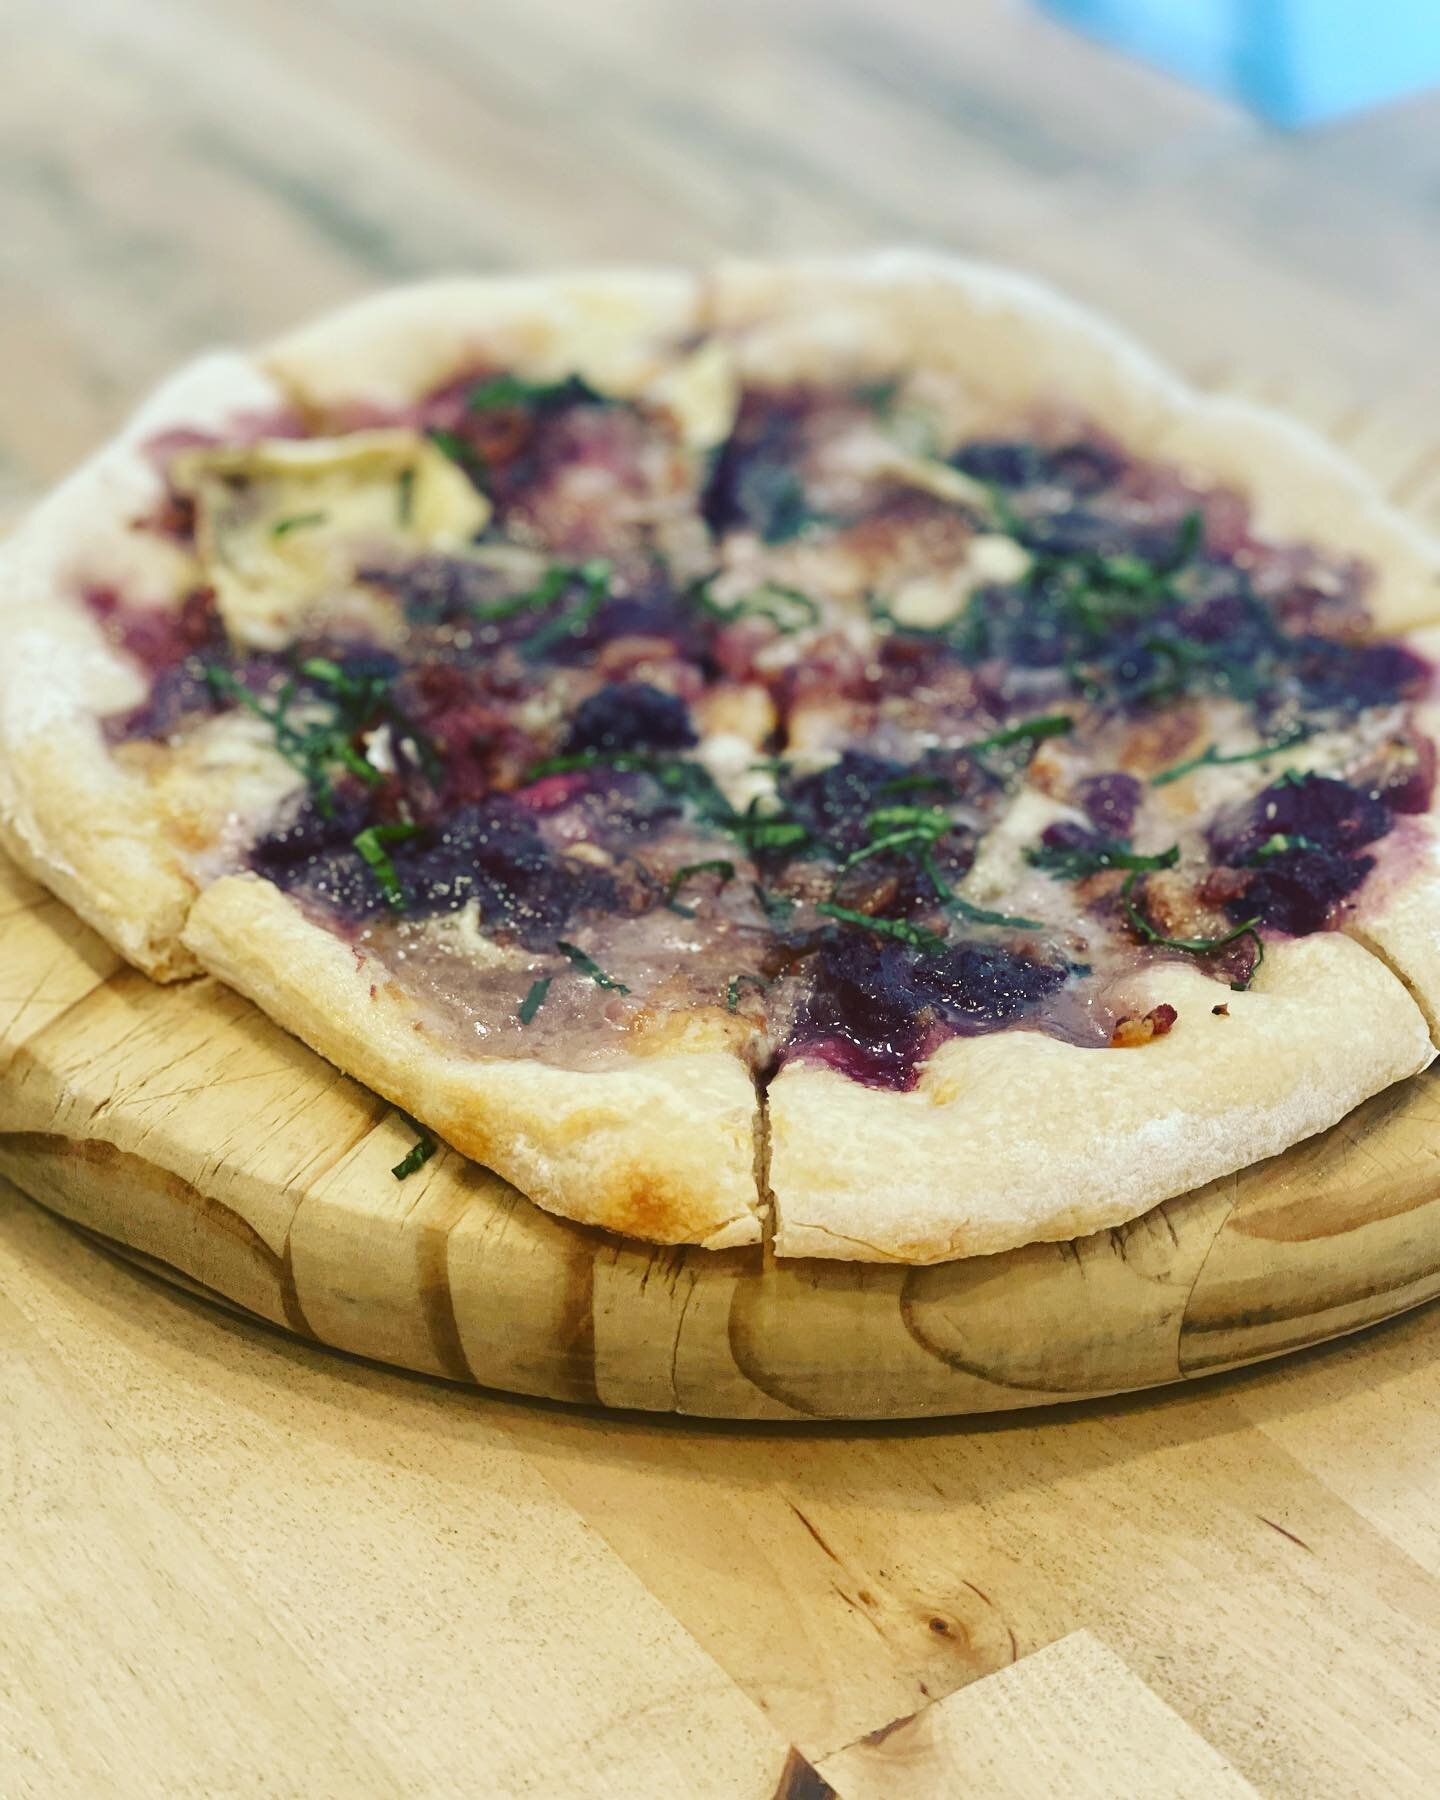 Here for a limited time! 

Jan 

Triple Cream Brie // Summer Berry Compote // Bacon 

#pizza #pizzeria #oshkosh #visitoshkosh #positivelyoshkosh #parm #chef #cheflife #food #foodie #foodporn #summer #eaa